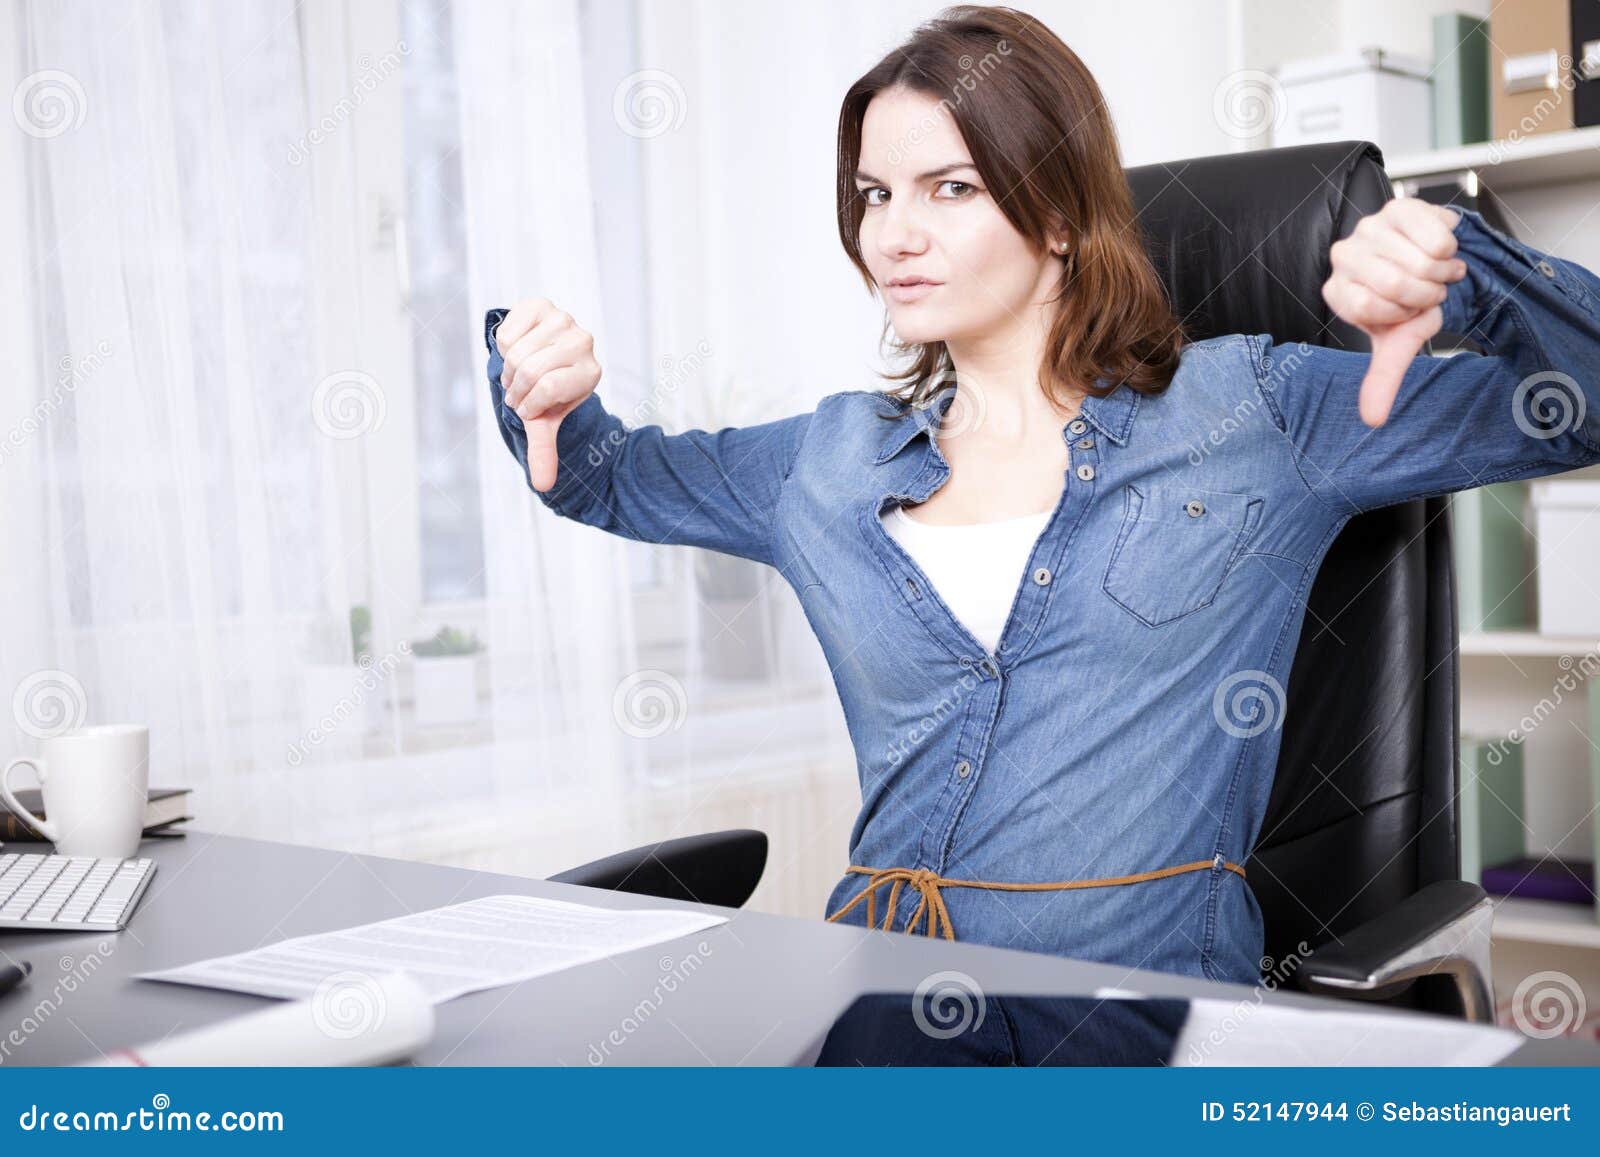 businesswoman giving an emphatic thumbs down